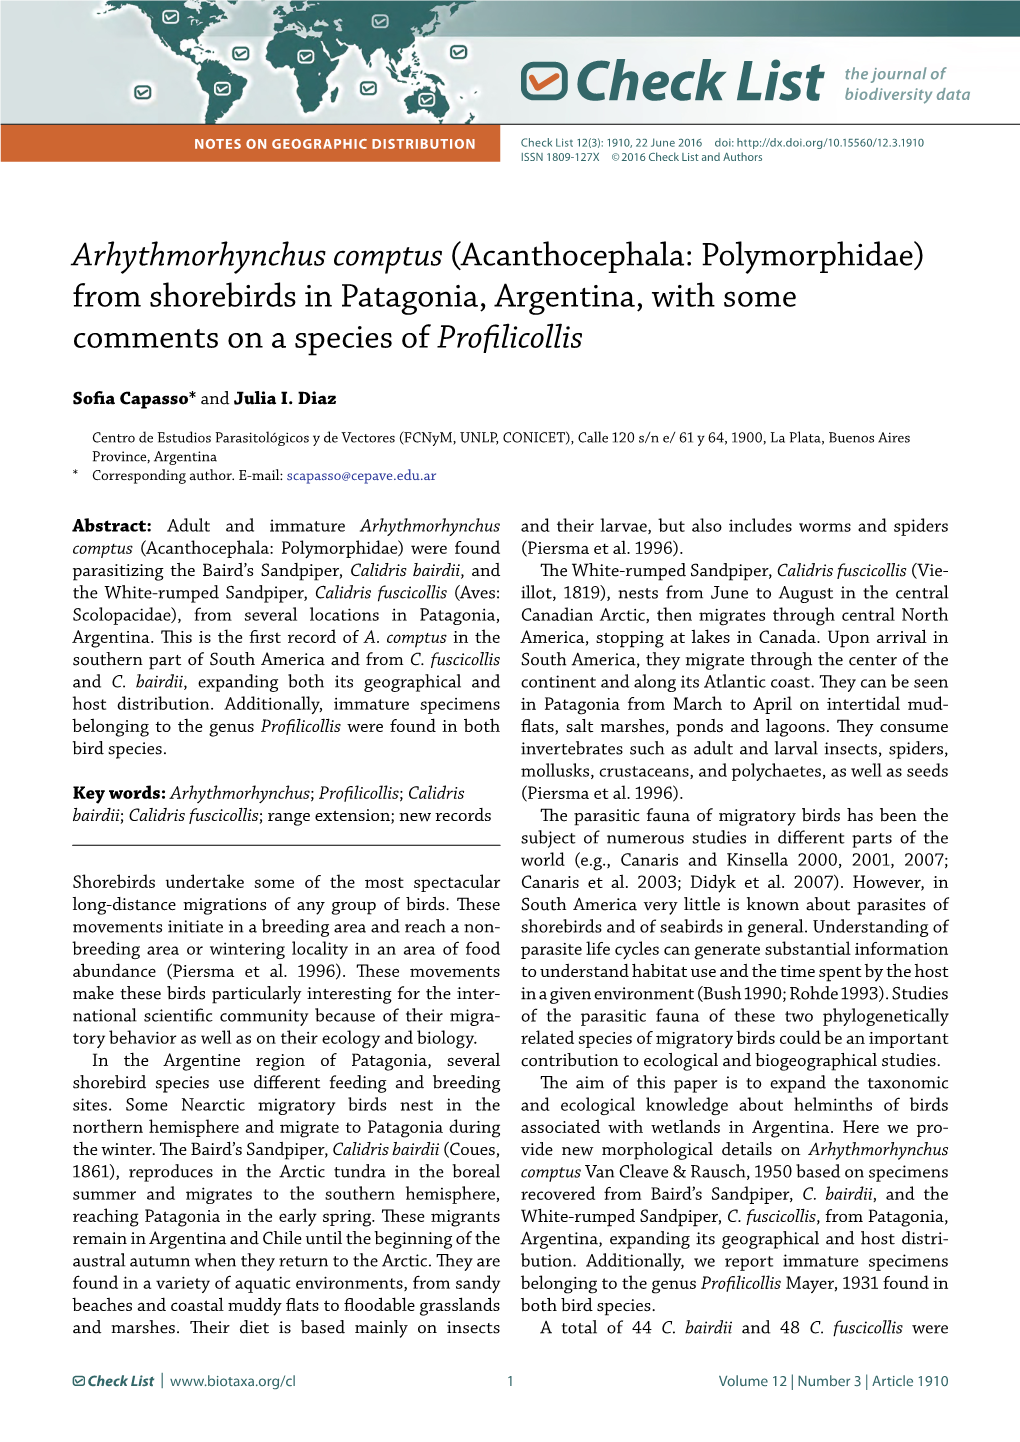 Arhythmorhynchus Comptus (Acanthocephala: Polymorphidae) from Shorebirds in Patagonia, Argentina, with Some Comments on a Species of Profilicollis